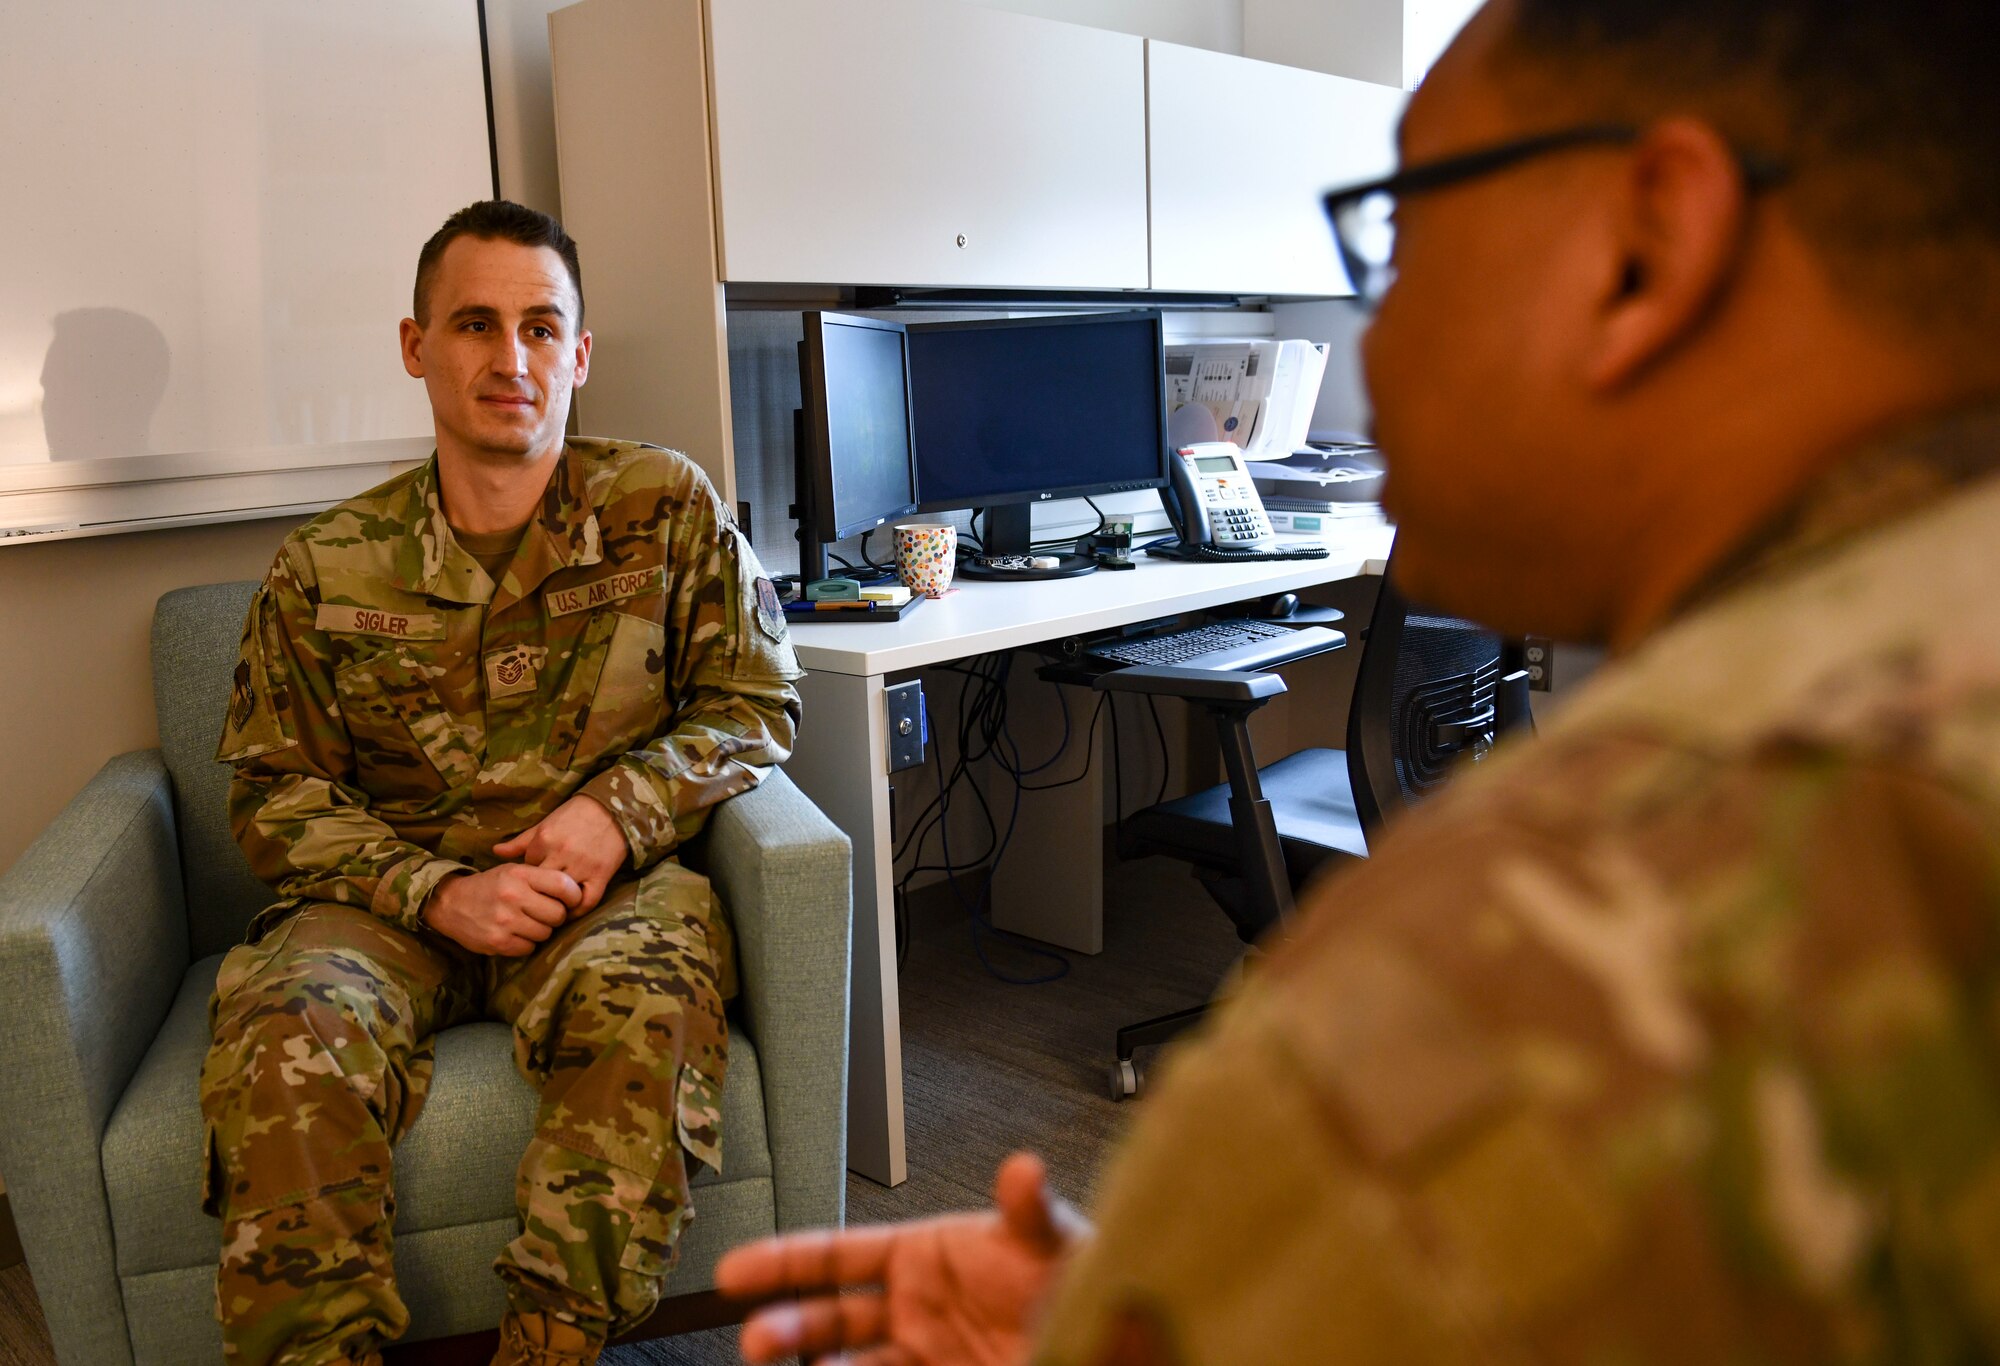 U.S. Air Force Tech. Sgt. James Sigler, 325th Operational Medical Readiness Squadron mental health flight chief, talks with a patient at Tyndall Air Force Base, Florida, March 4, 2020. Sigler is in charge of the mental health clinic's daily operations and makes sure the patients get the care they need. (U.S. Air Force photo by Senior Airman Stefan Alvarez)